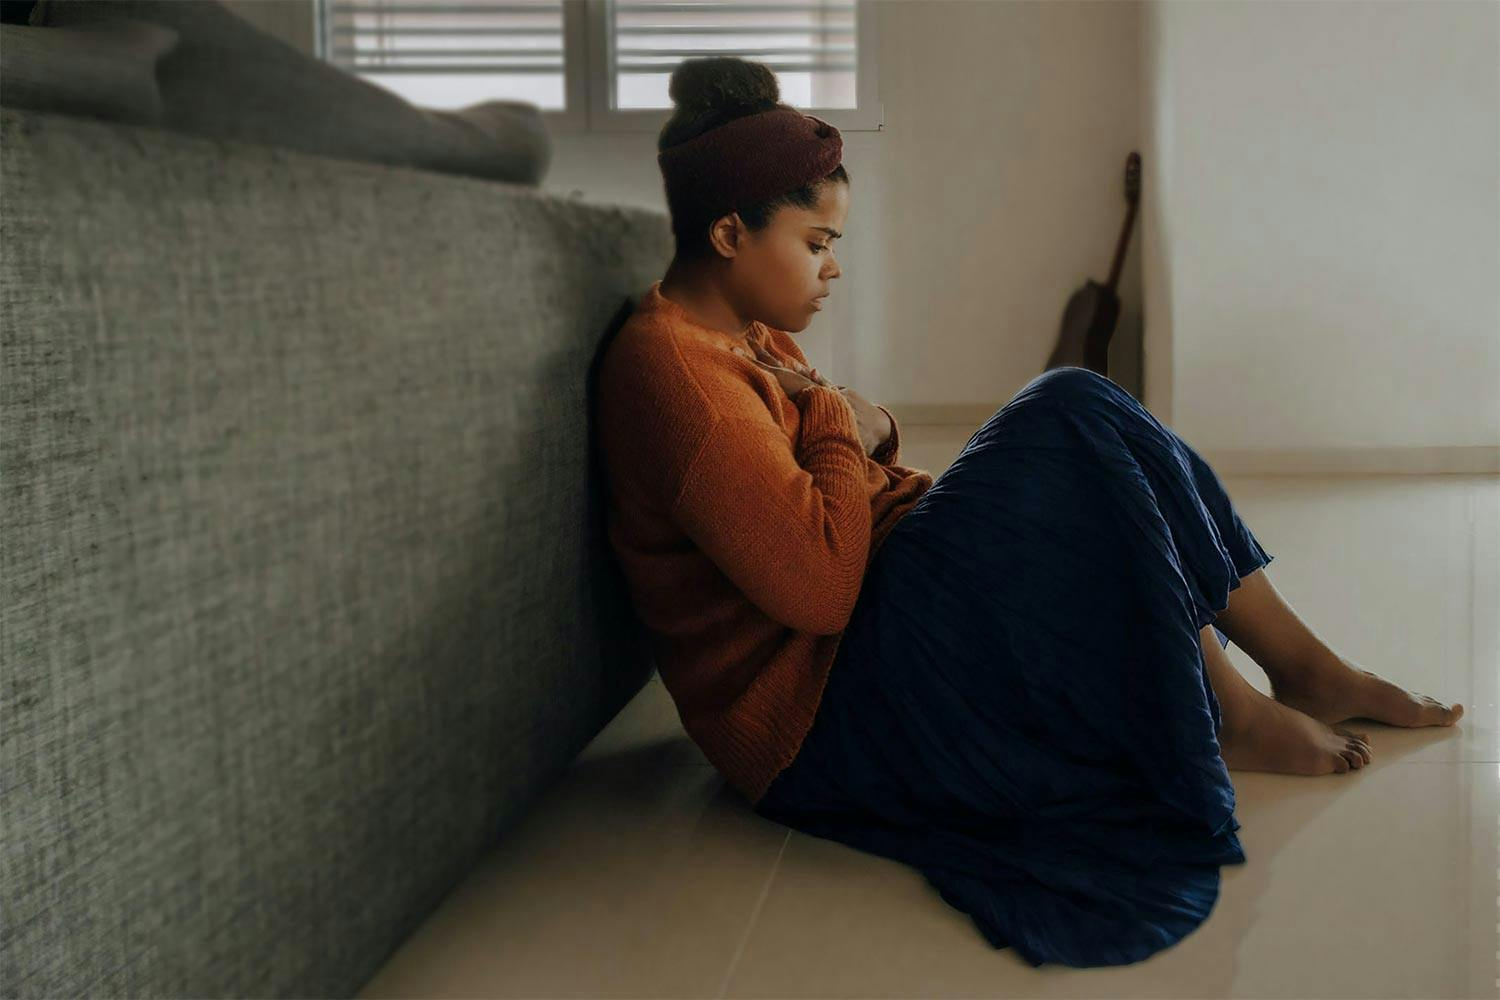 A young Black woman sits on the floor leant against the back of a couch holding her chest with both hands looking distressed.